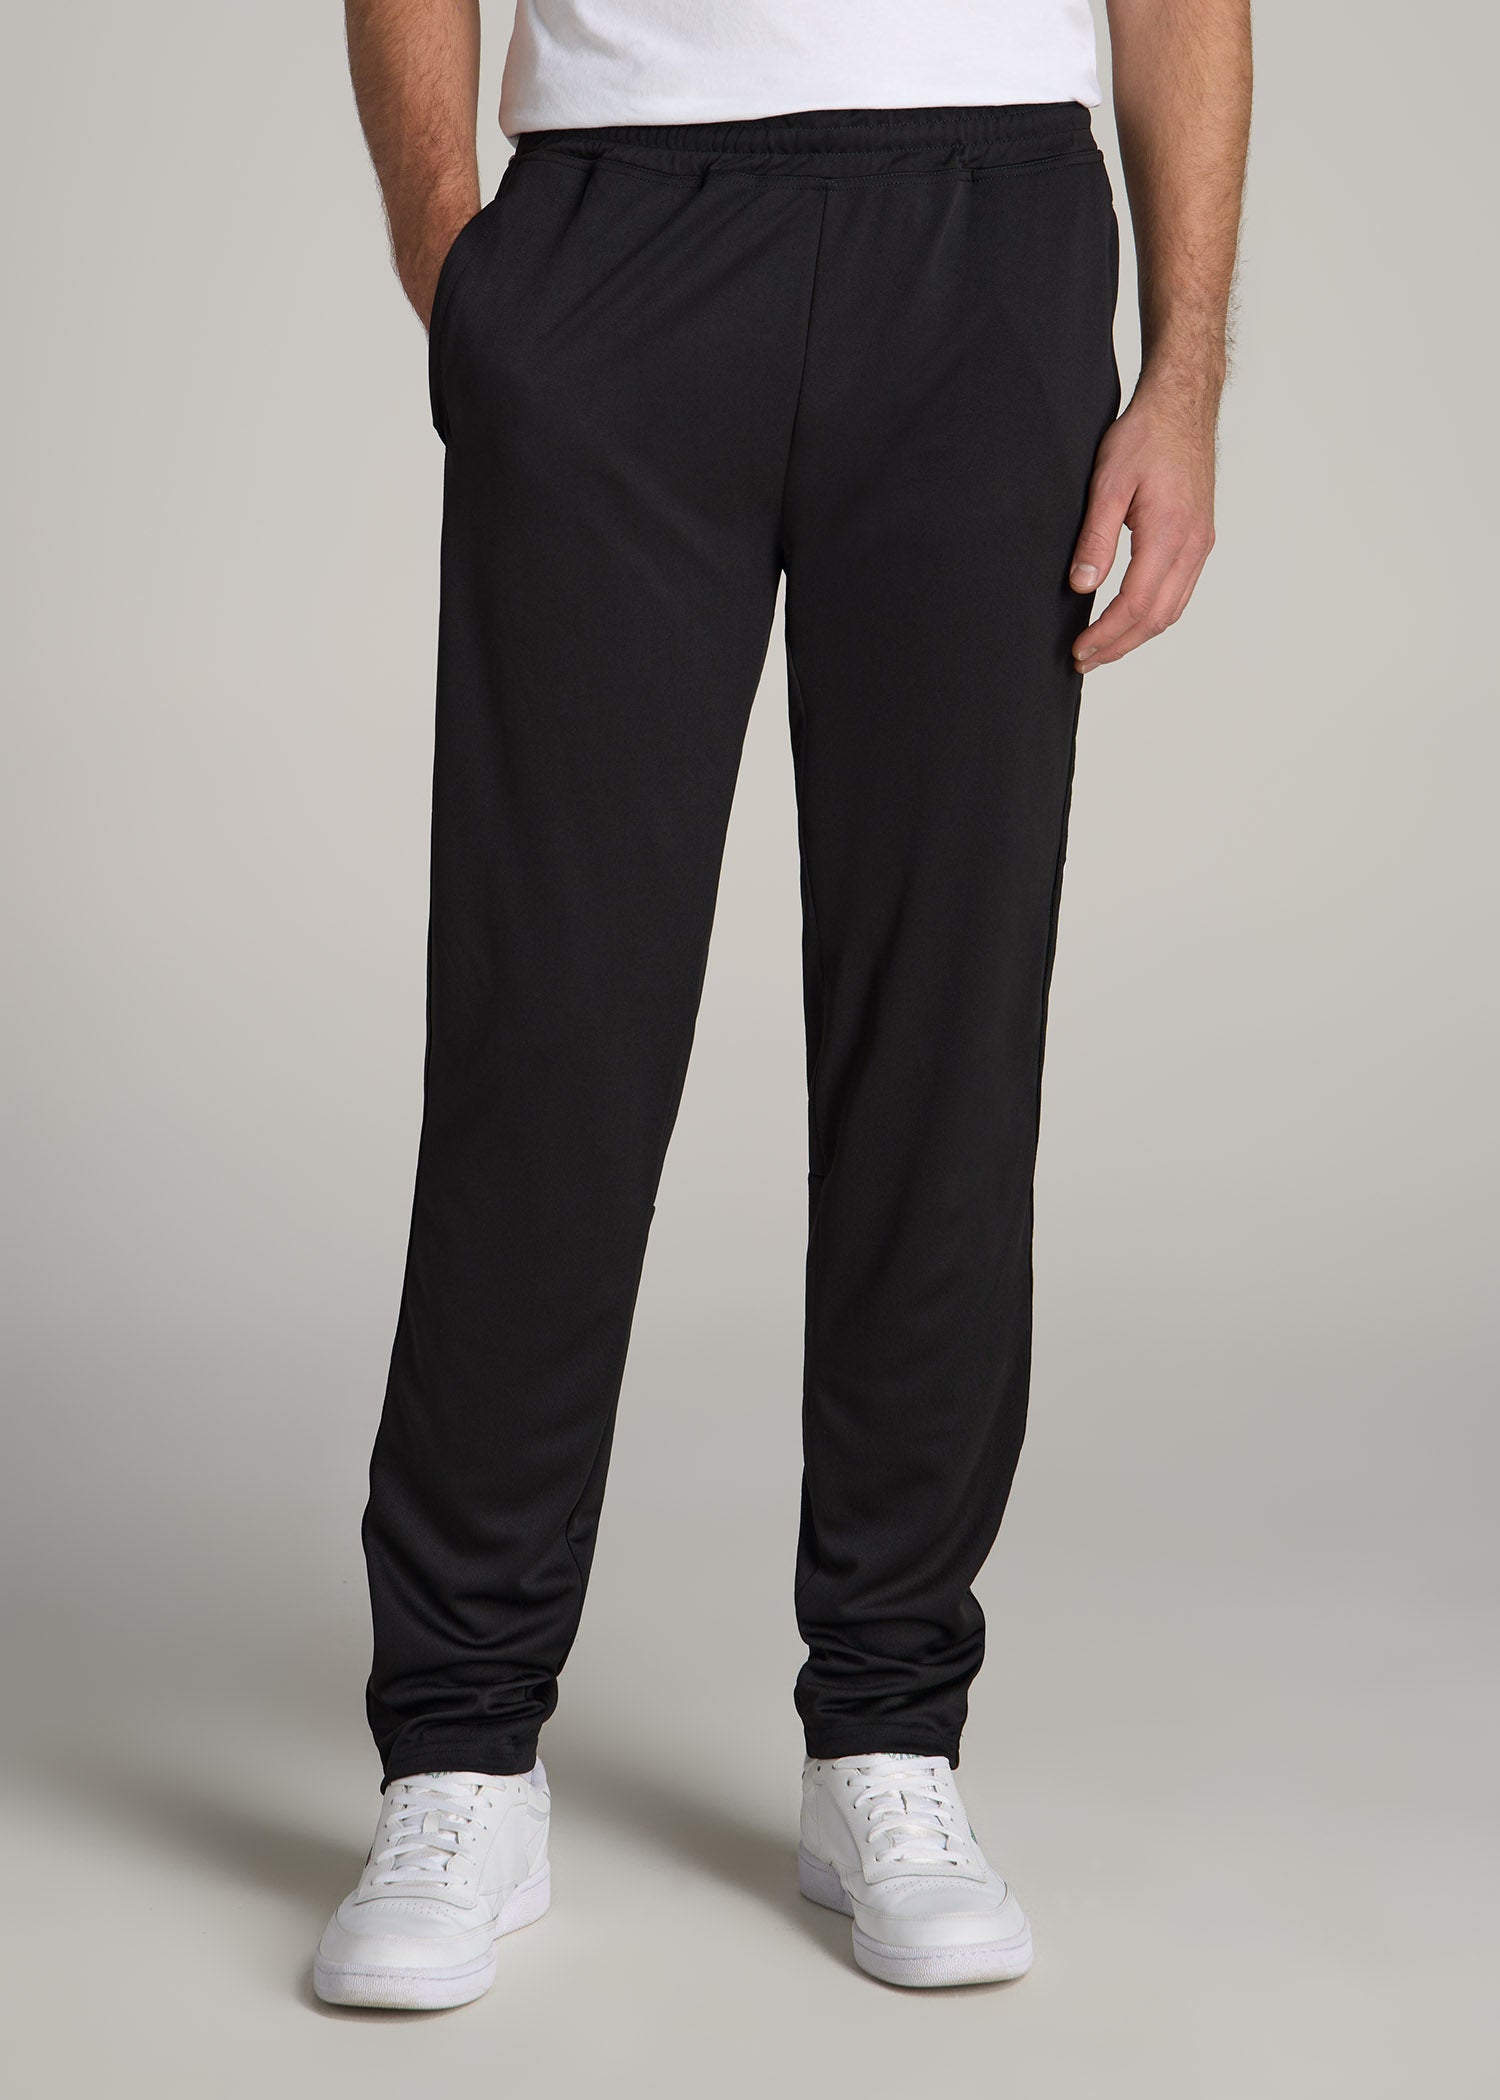 ADIDAS Lounge Heavy French Terry Pant, Black Men's Casual Pants